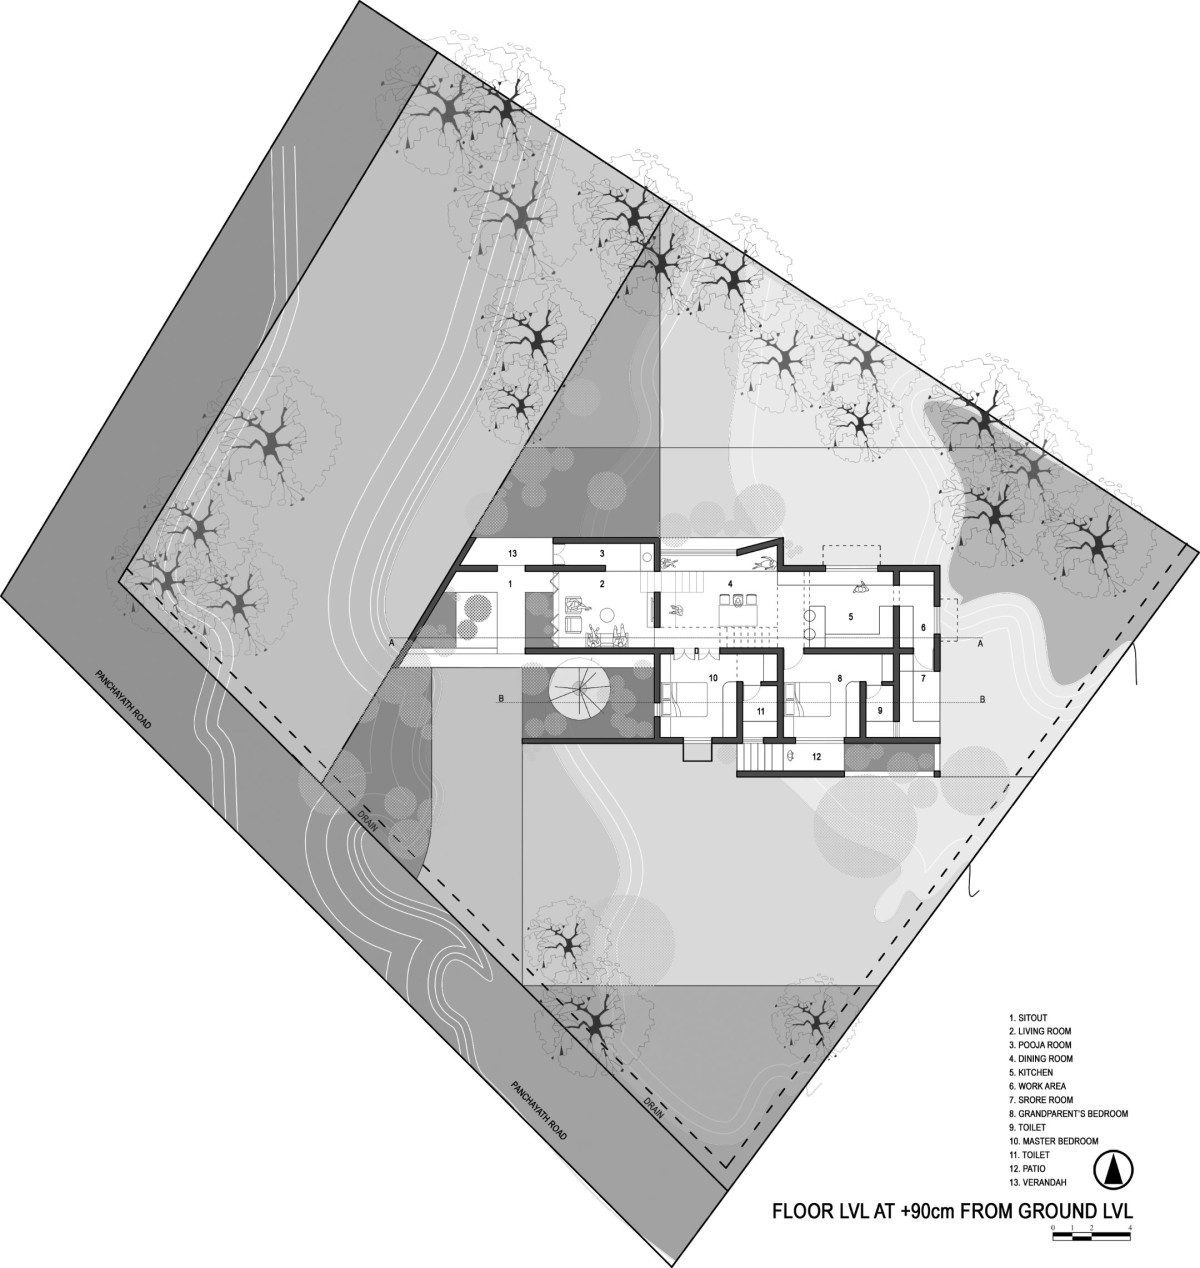 Level 1 plan of Bay Leaf House by Project 51 A (h)